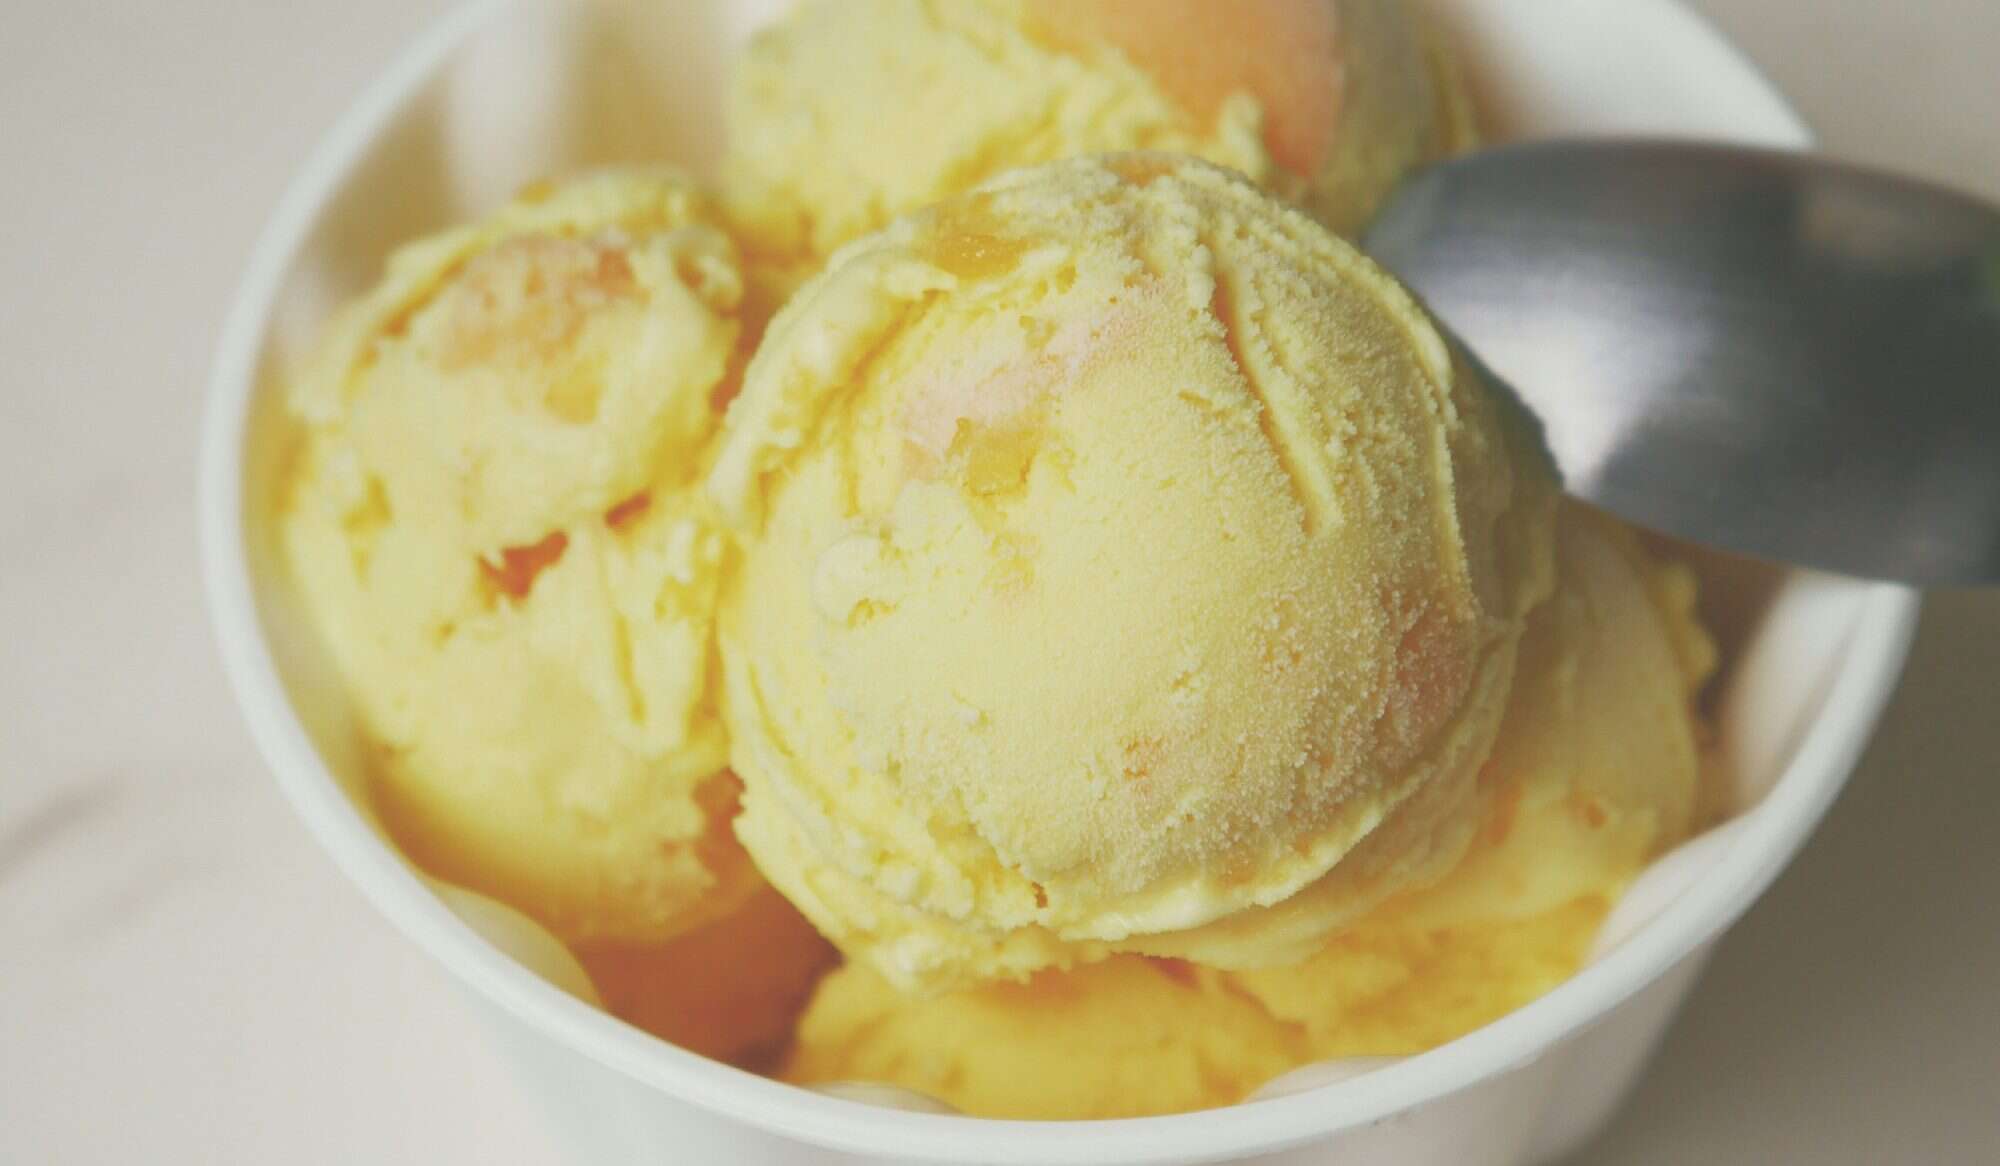 Melting Cheese Sex Scene - Cheddar Cheese Ice Cream: Is It Gross? | MyRecipes